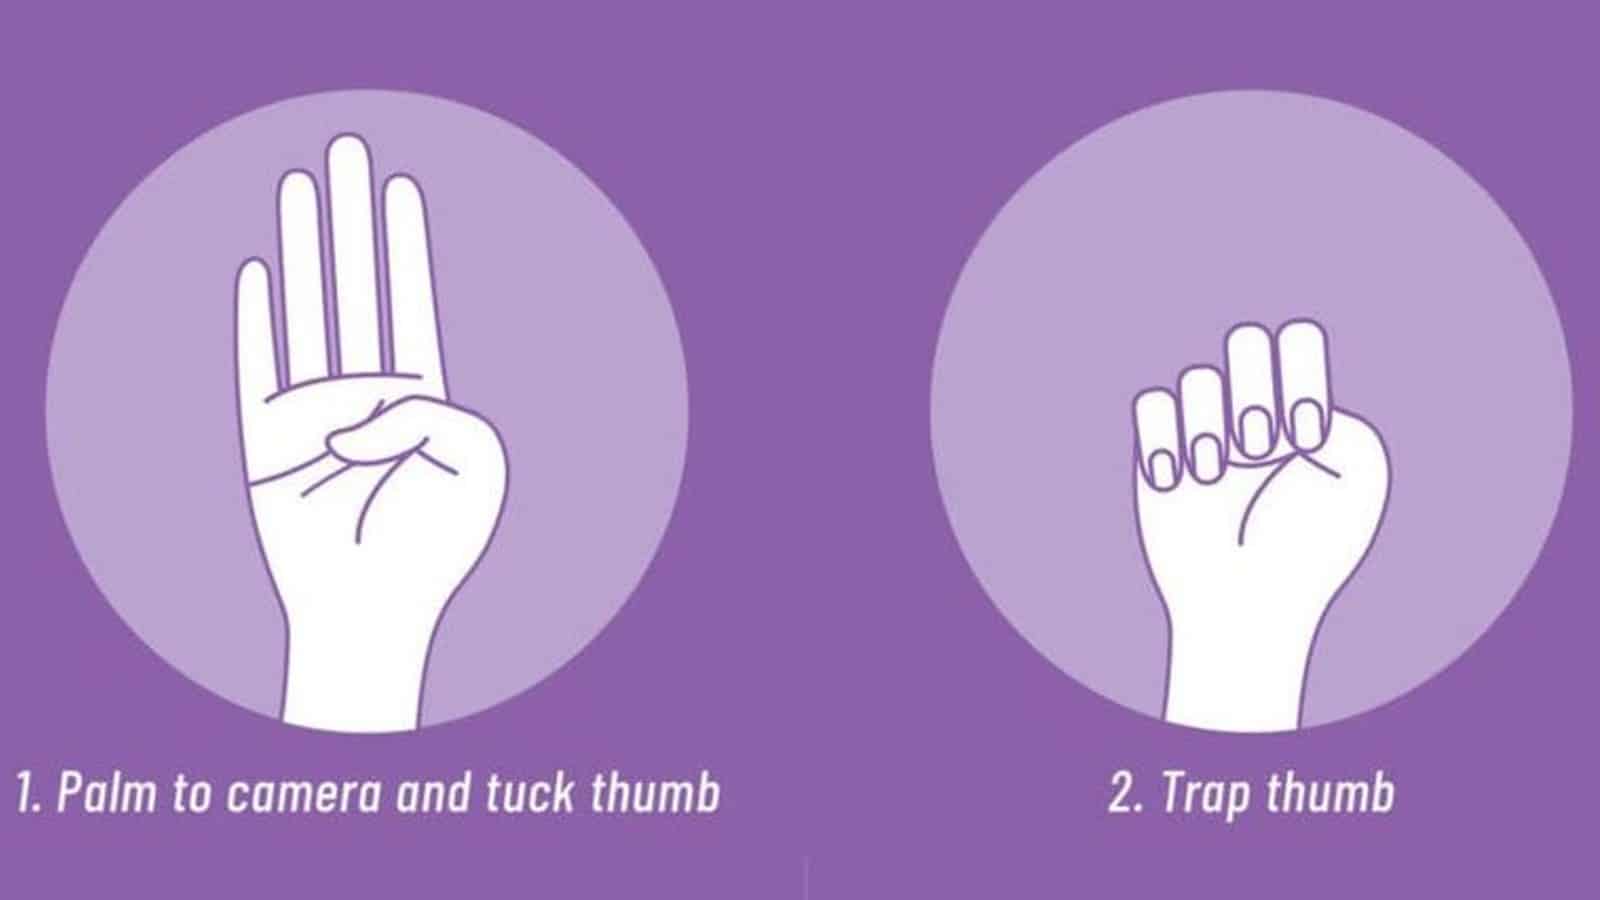 Graphic of hand signal to indicate distress